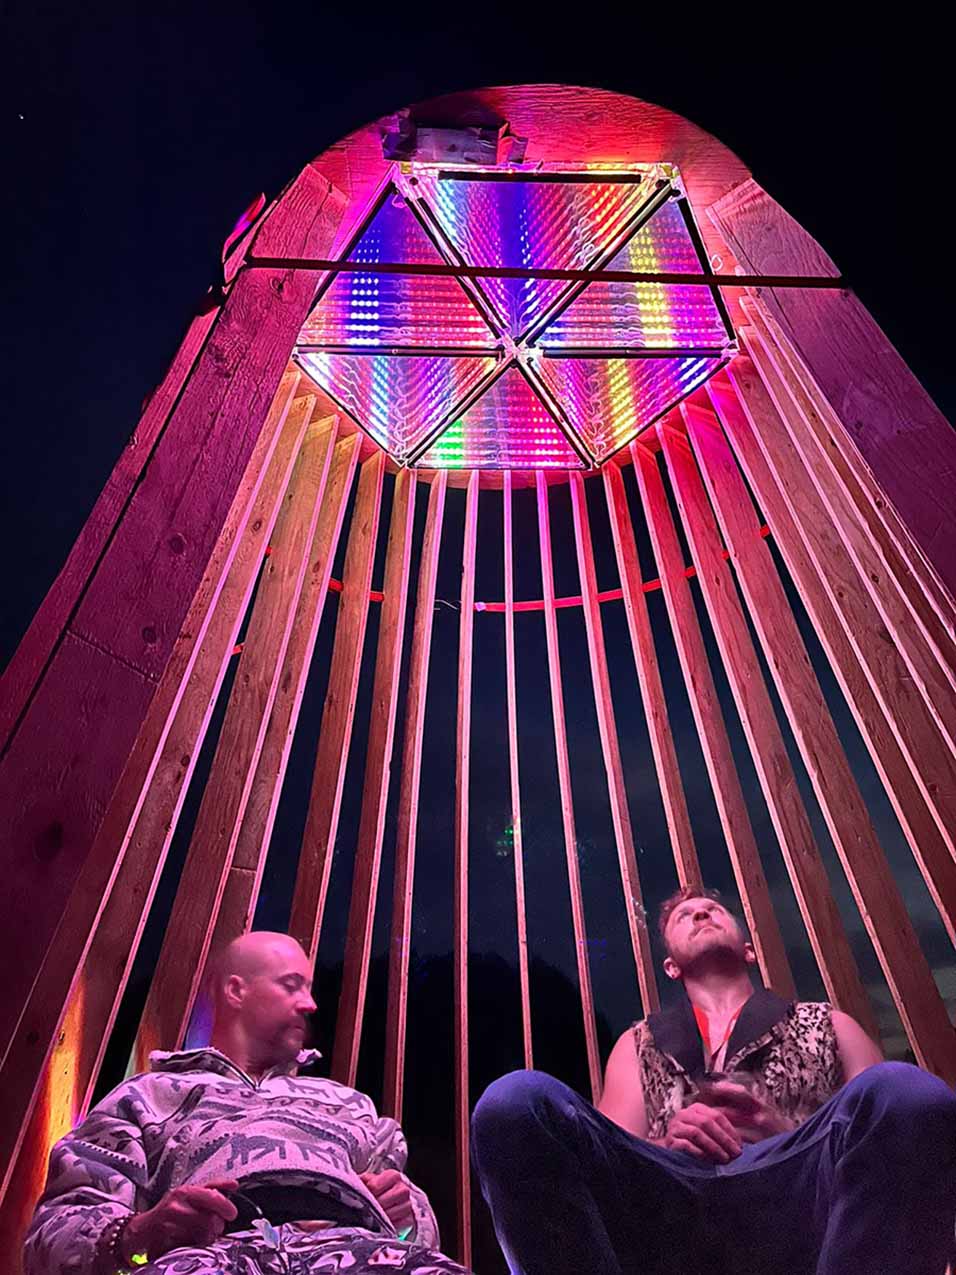 2 people sit under a cone shaped wood structure with an inifinty mirror ontop. One guy is looking up at it. There are pink and purple and white lights in the mirror illuminating them